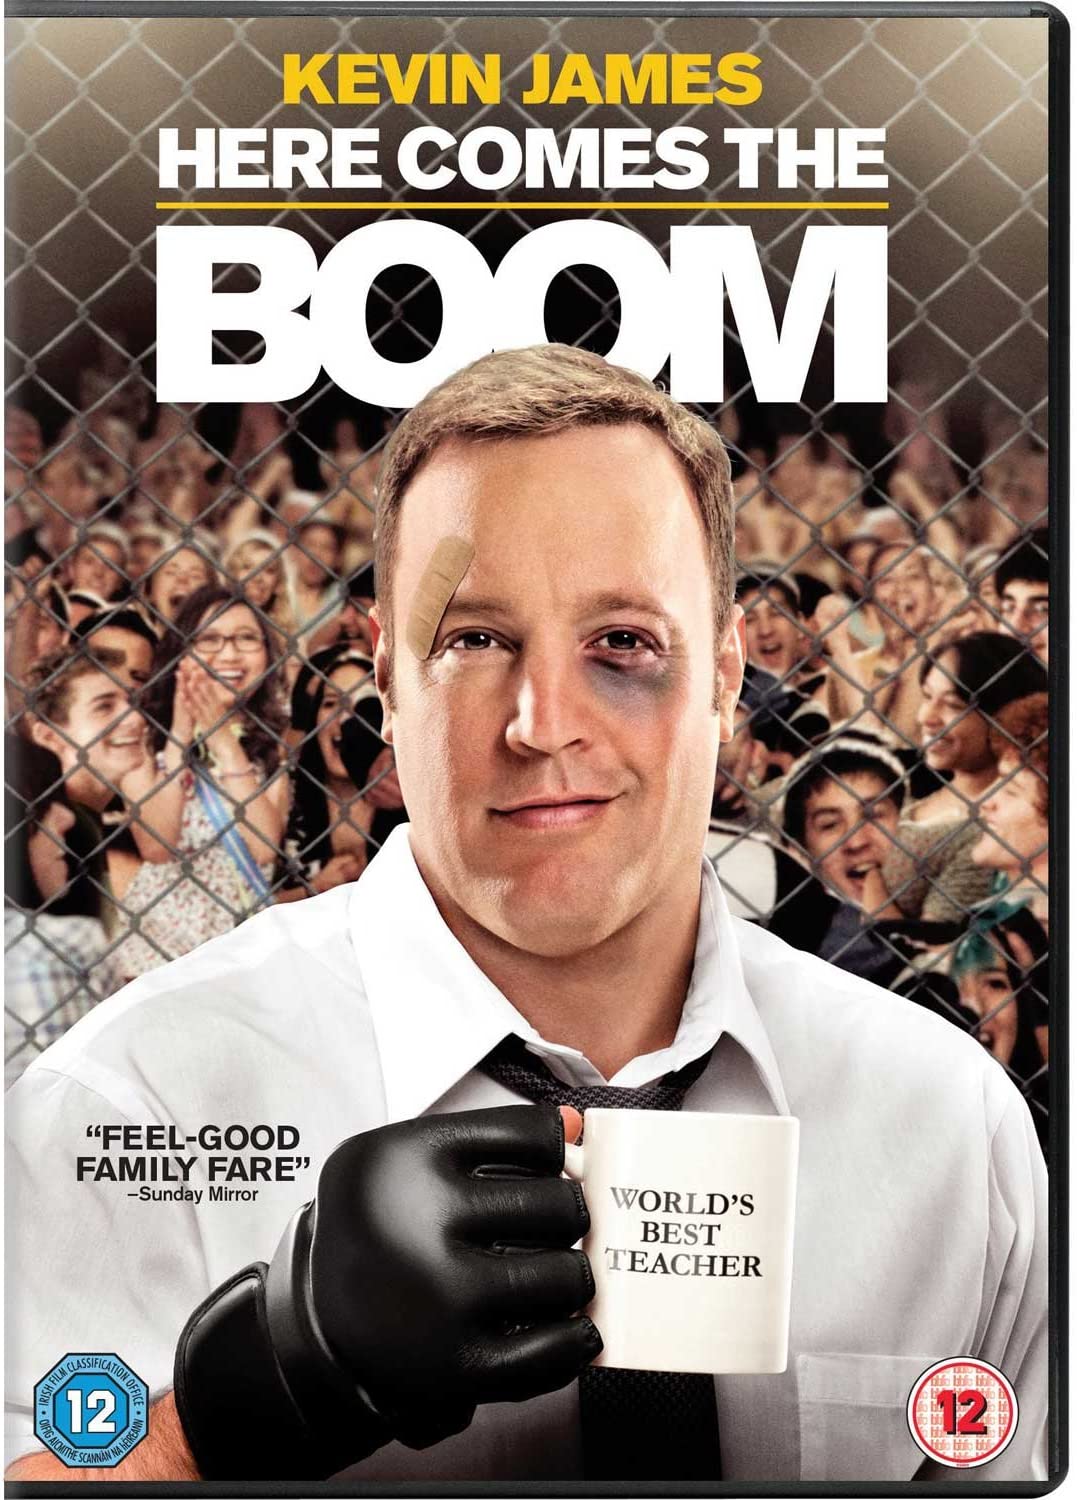 Here Comes The Boom [2012] – Komödie/Action [DVD]